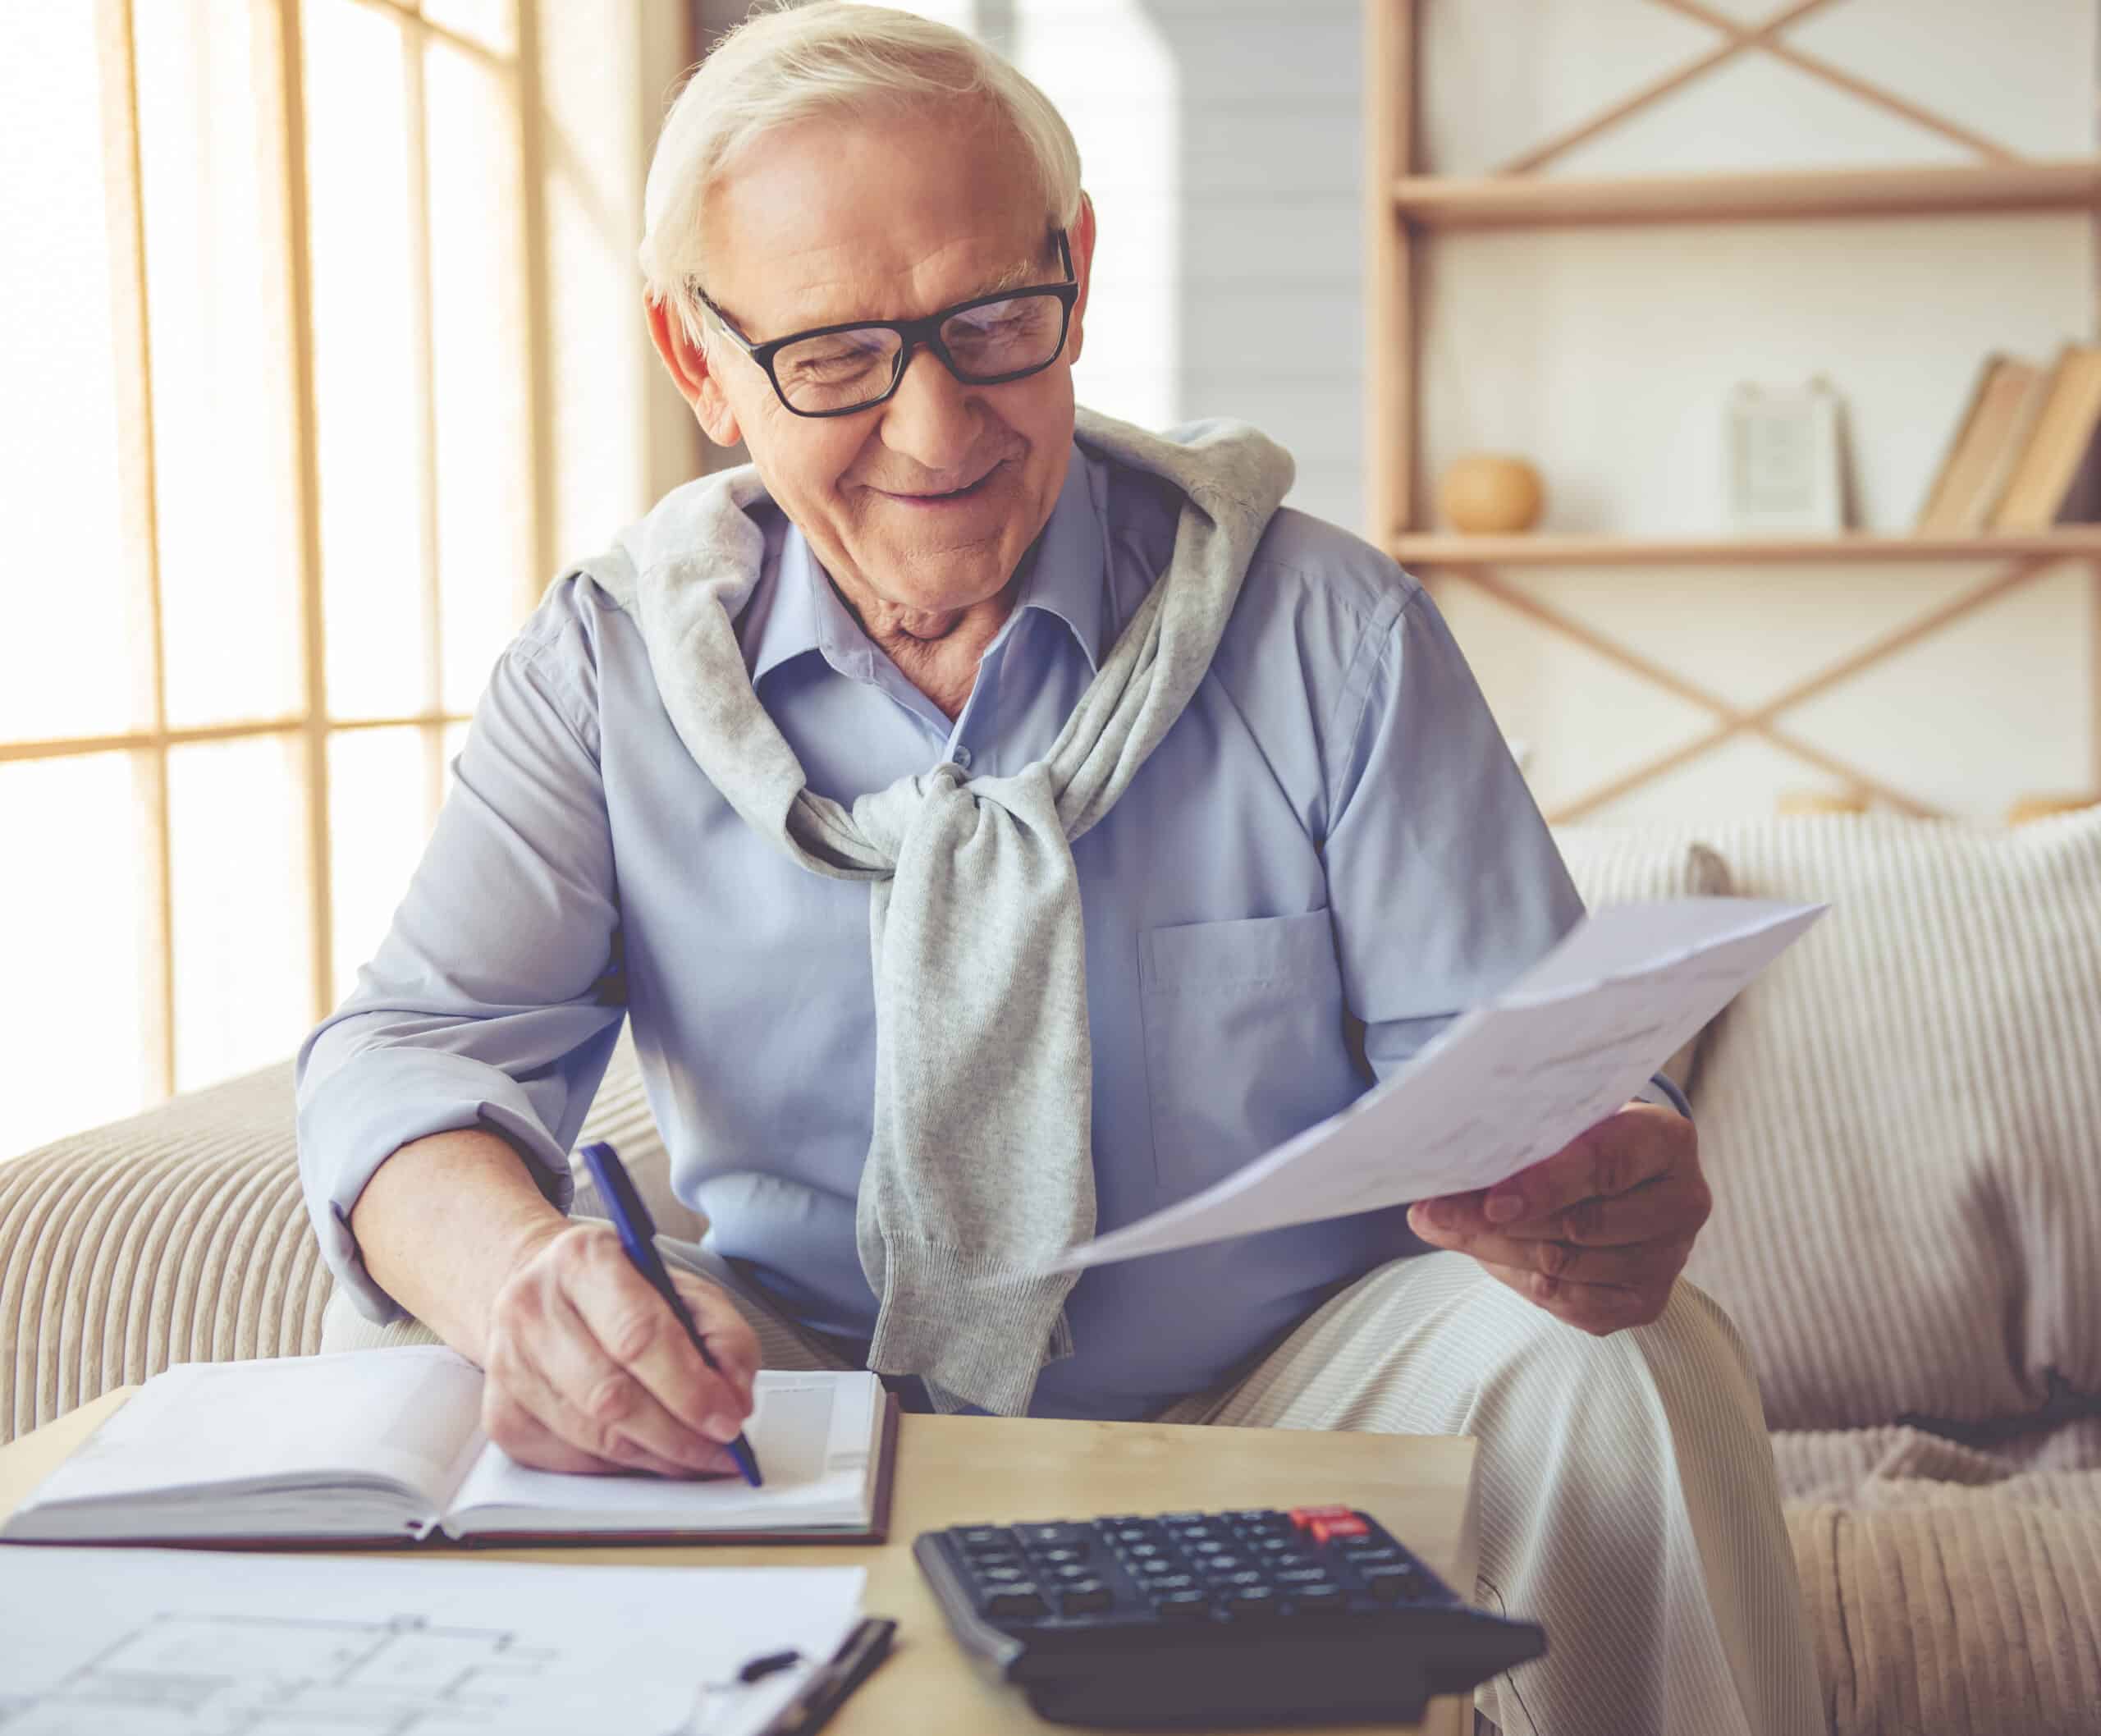 Here Are 40 of the Best Jobs for Retirees